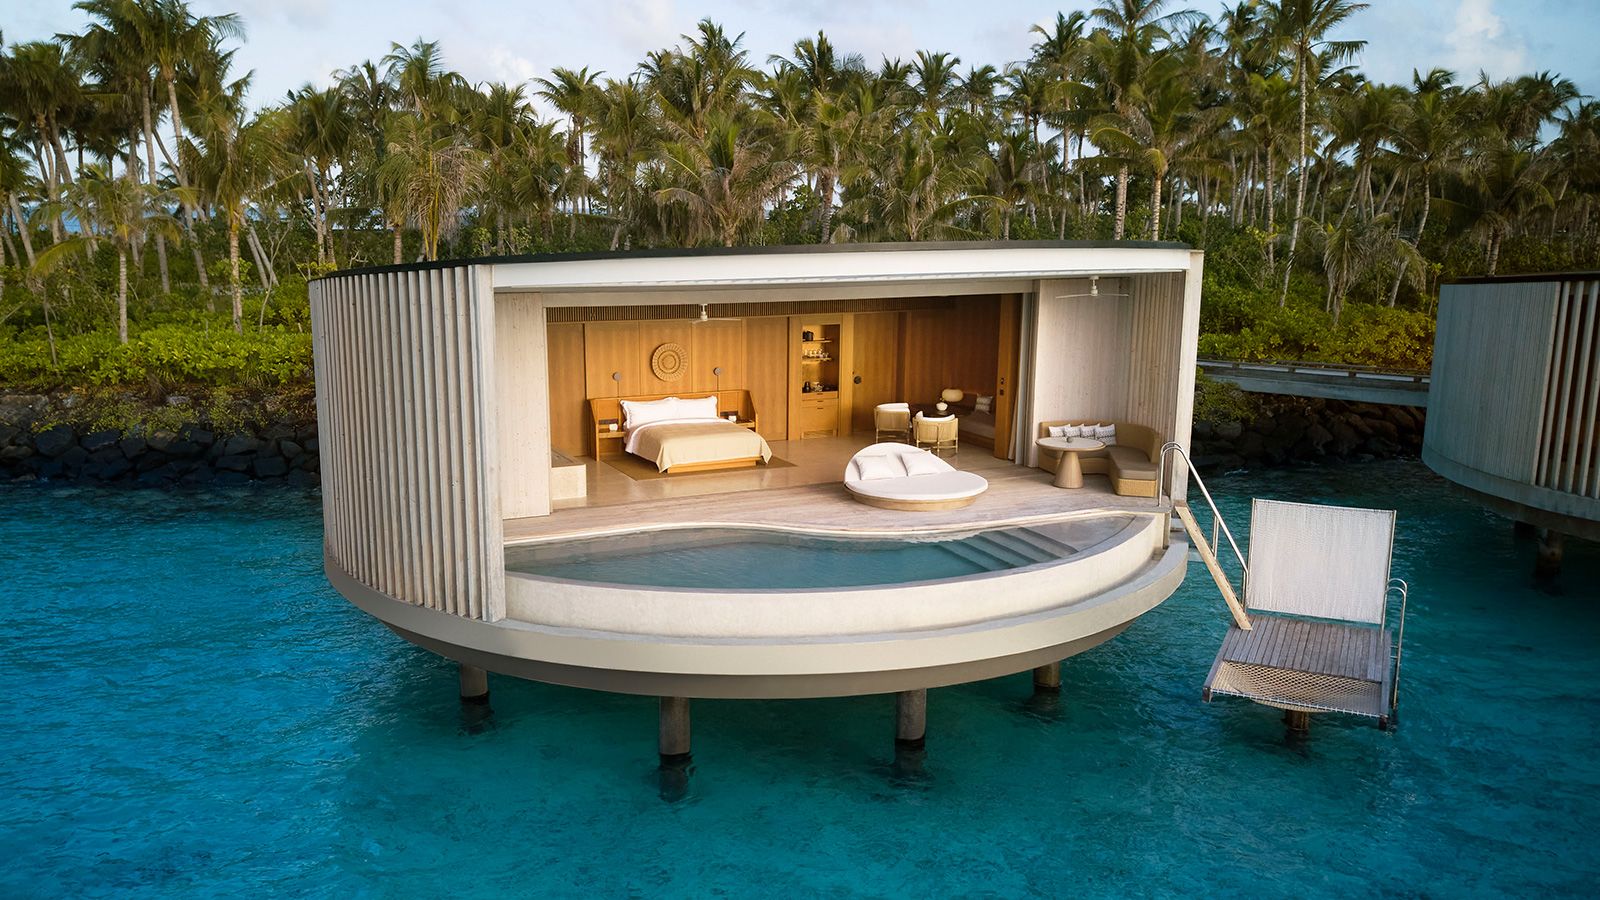 <strong>The Ritz-Carlton Maldives, Fari Islands: </strong>The majority of the 100 villas at this stunning new luxury resort are over water. Channeling the motion of the ocean, each is uniquely circular in design and outfitted with distinct, vertical wooden slats made from sustainable timber. 